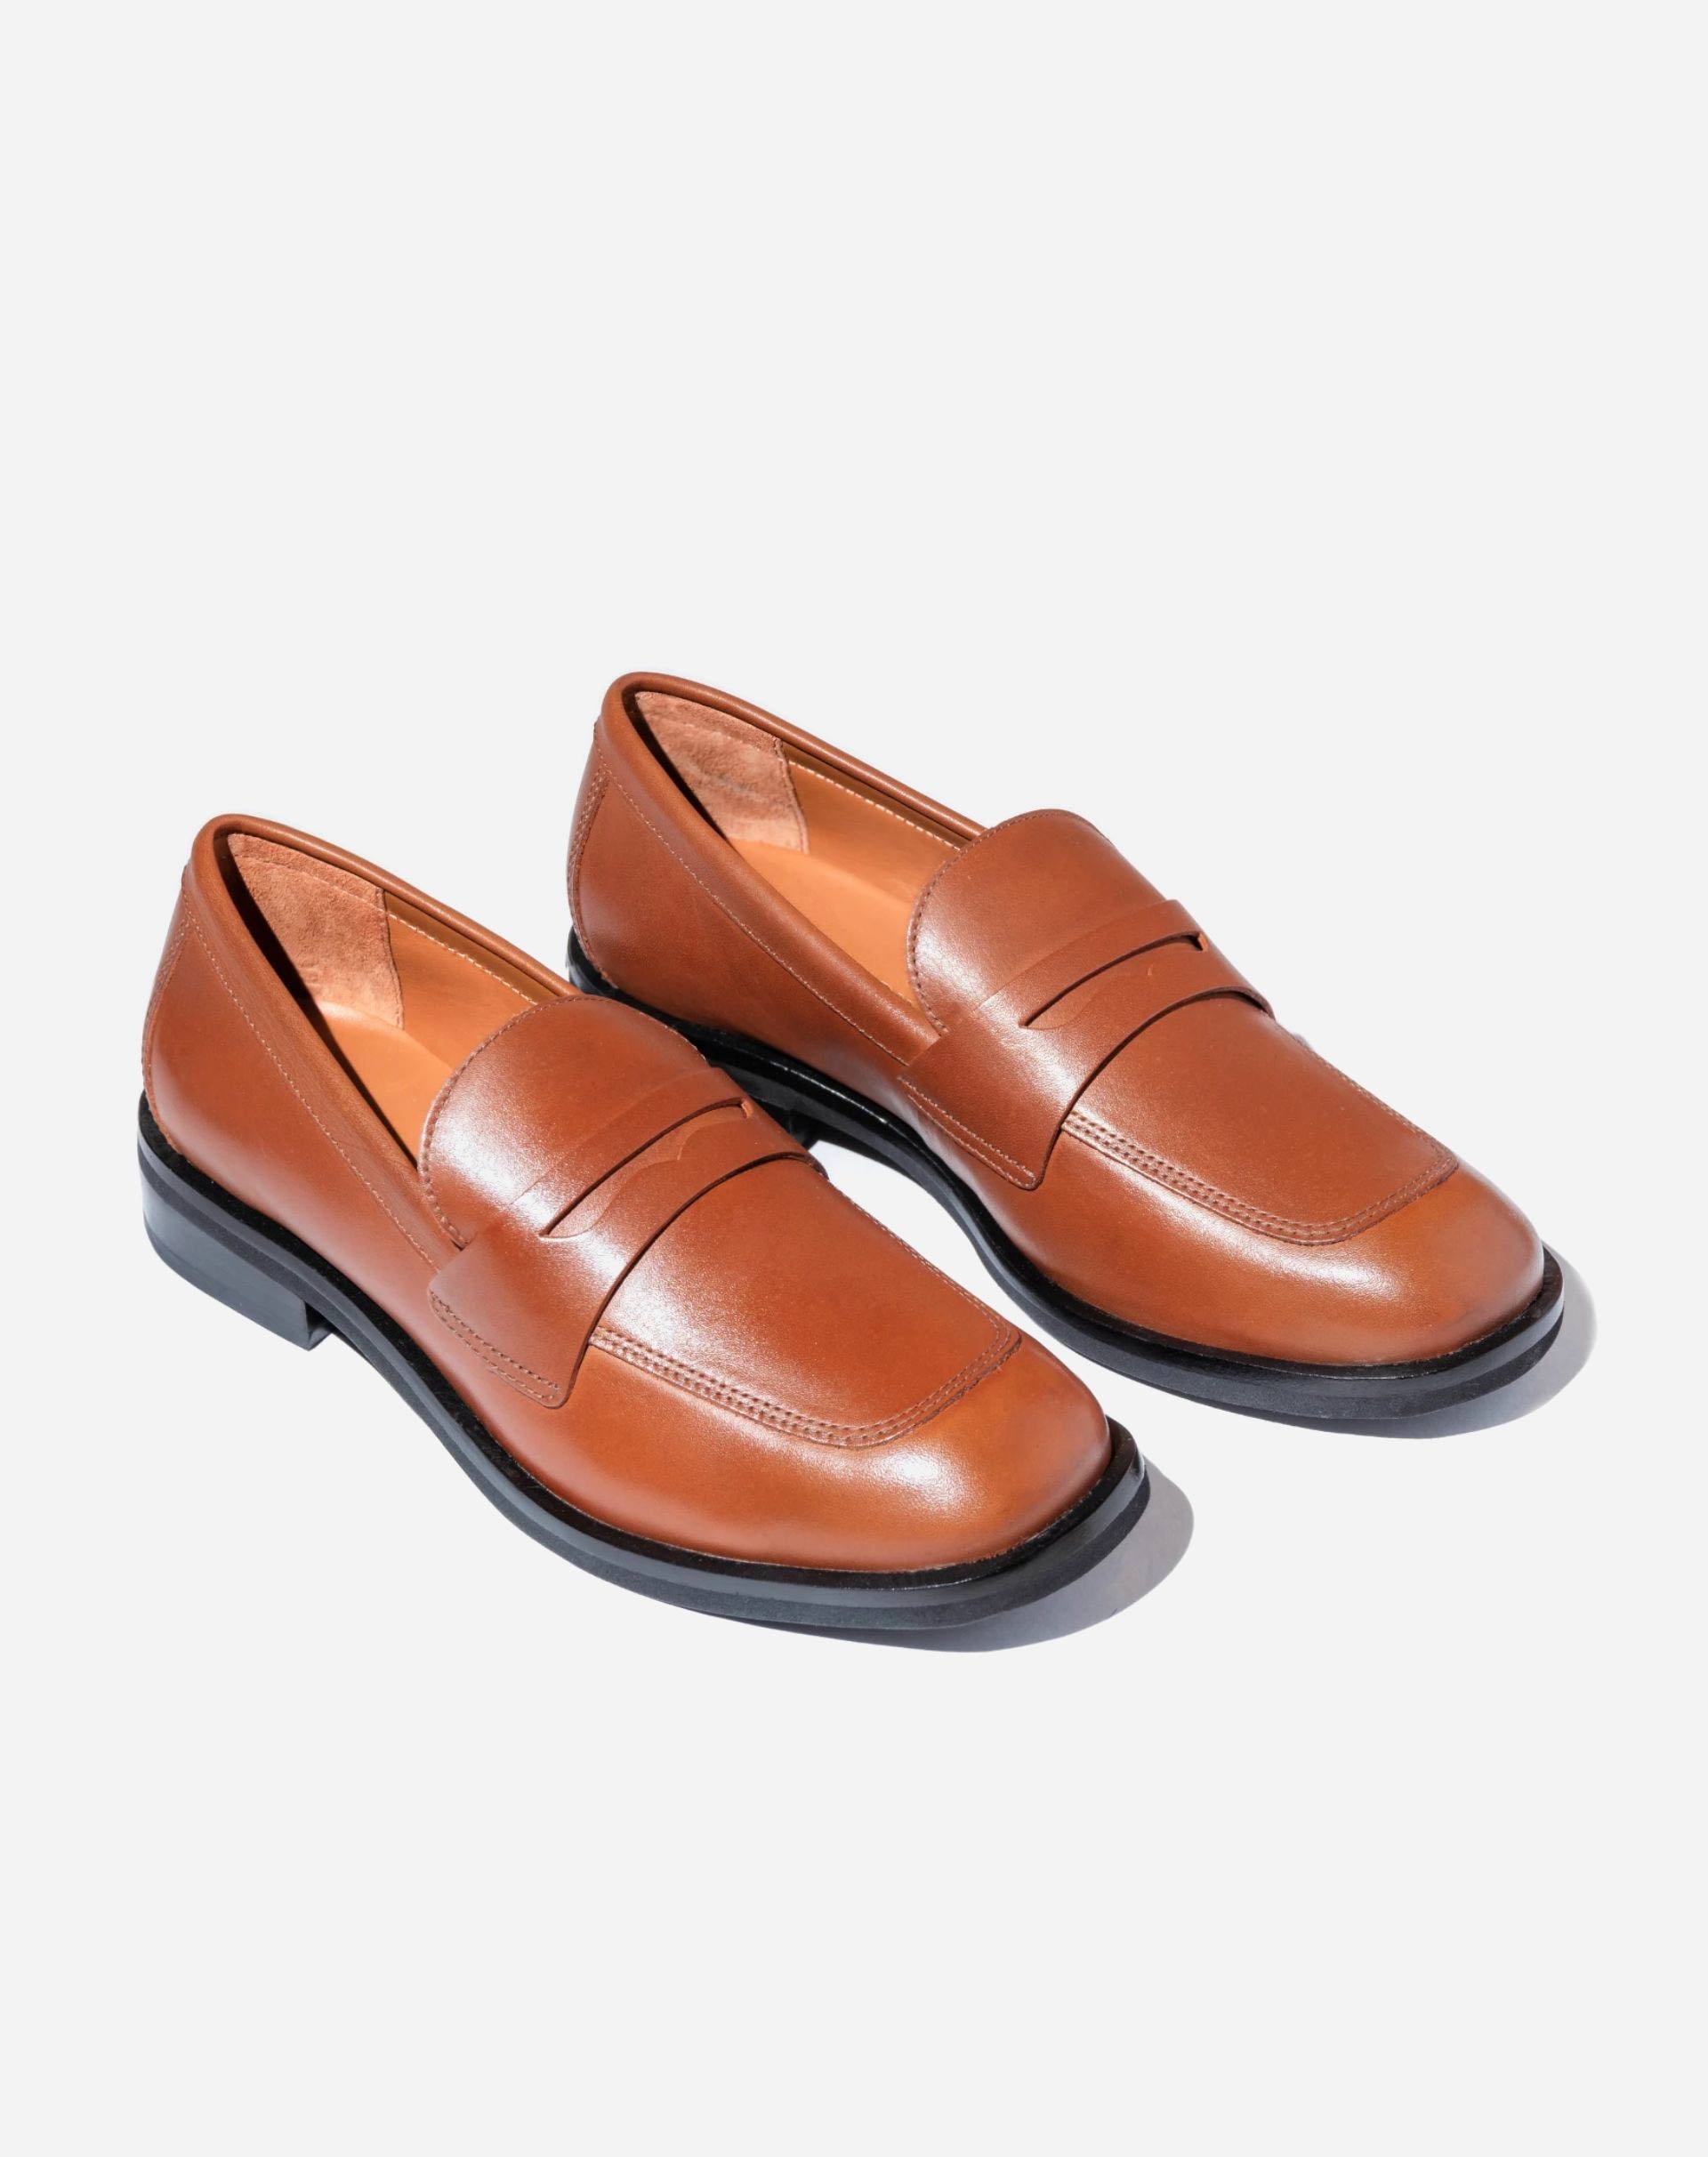 Loafer Diana - CARAMELO